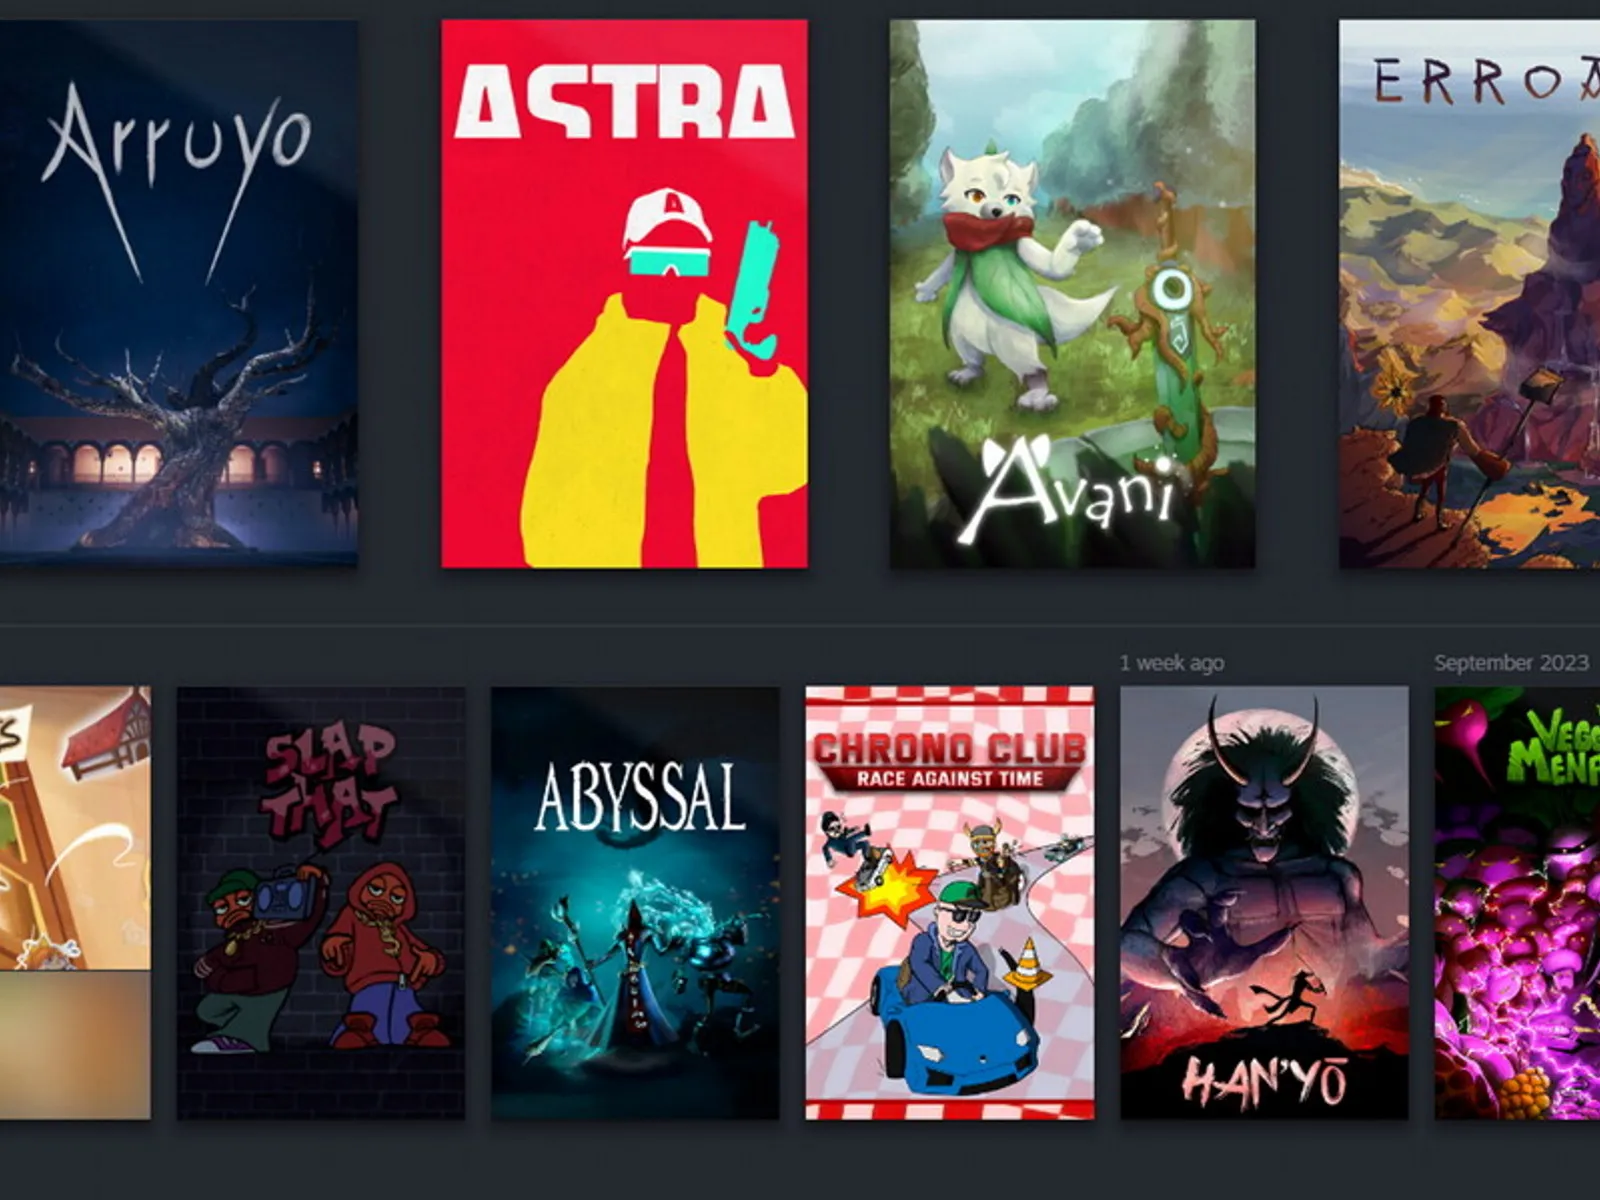 Screenshot displaying the covers of a dozen games from the DigiPen Europe-Bilbao Steam library.